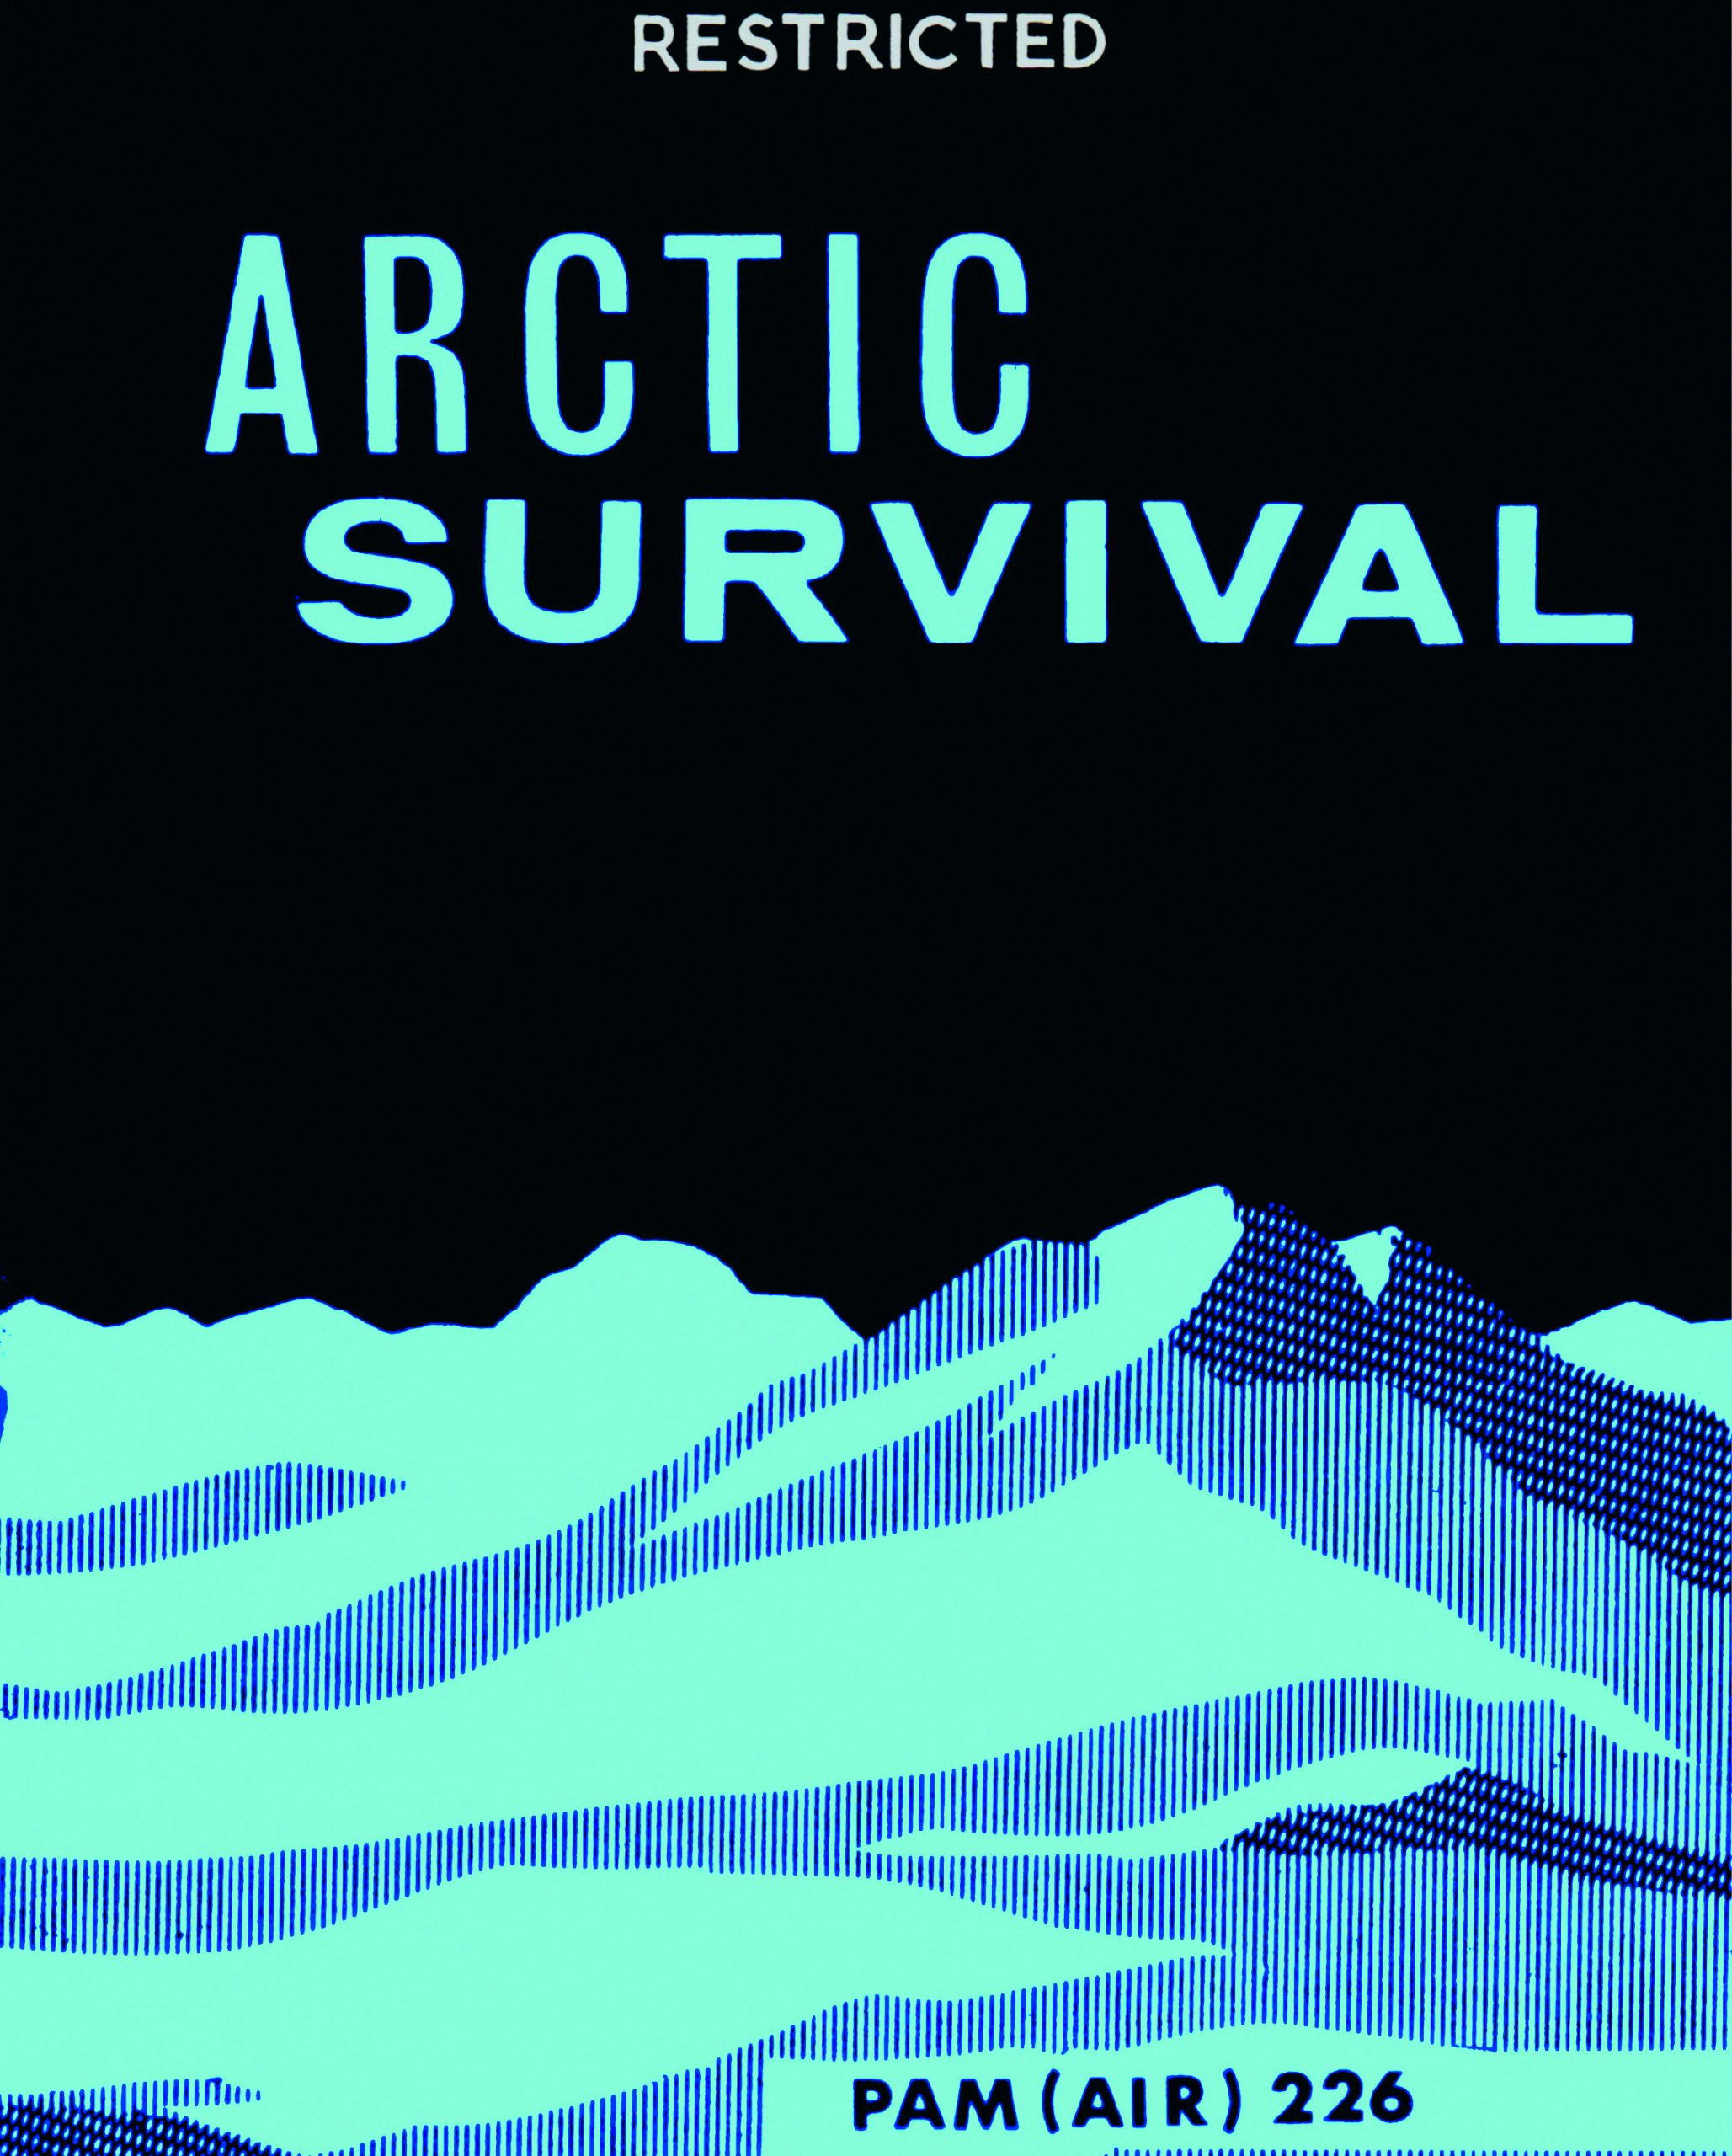 Arctic Survival (1953) The cover of Arctic Survival a life-saving manual issued to UK airmen in the early 1950s.